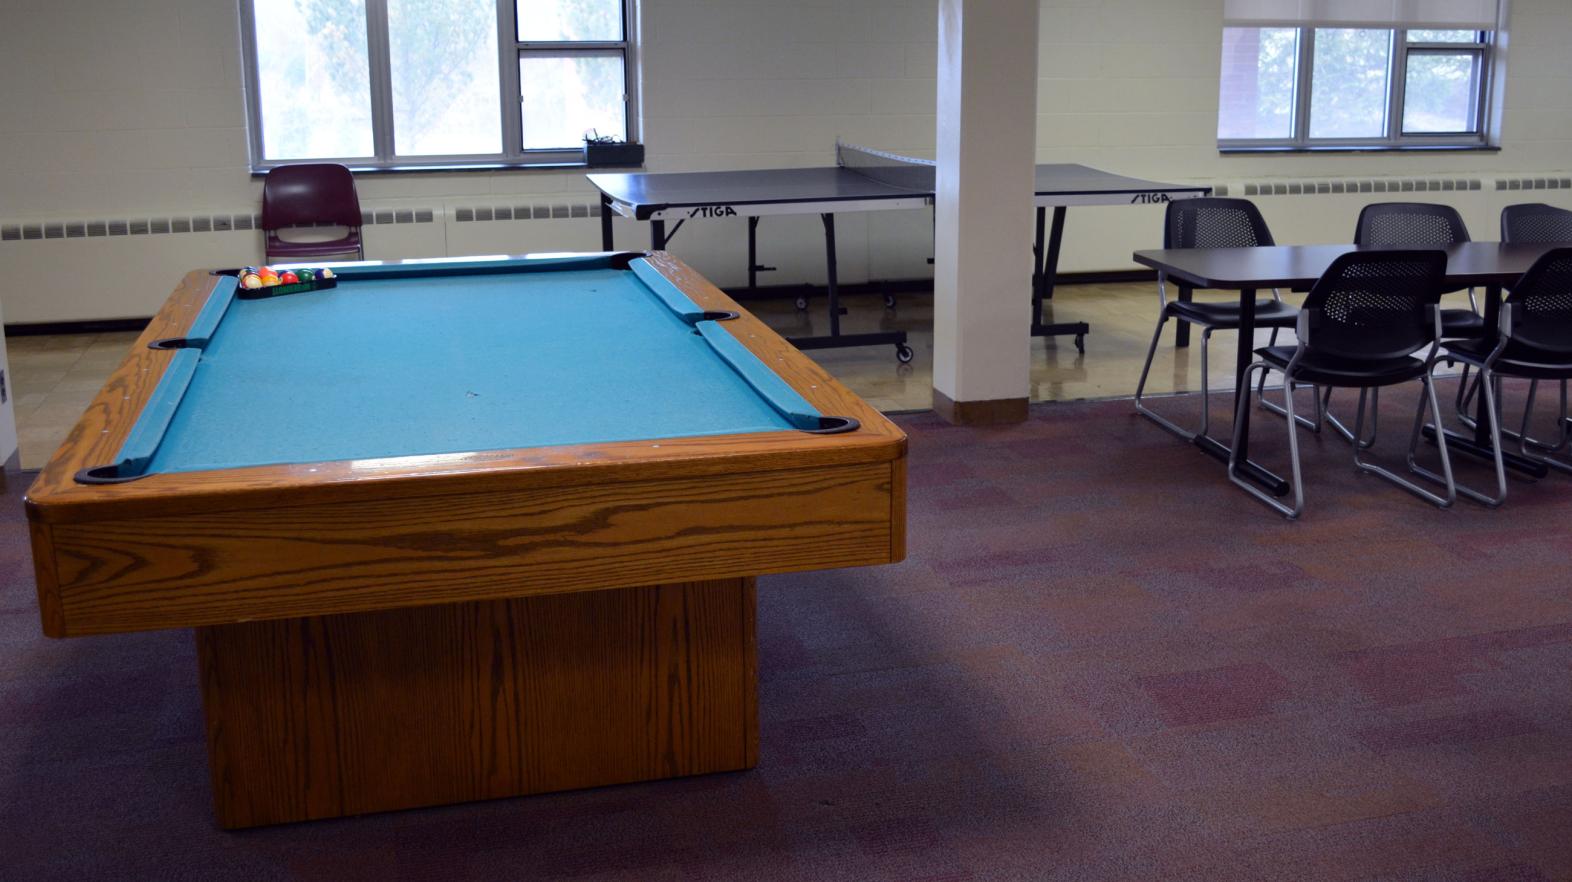 A pool table is included in the basement lounge of Massasoit hall.